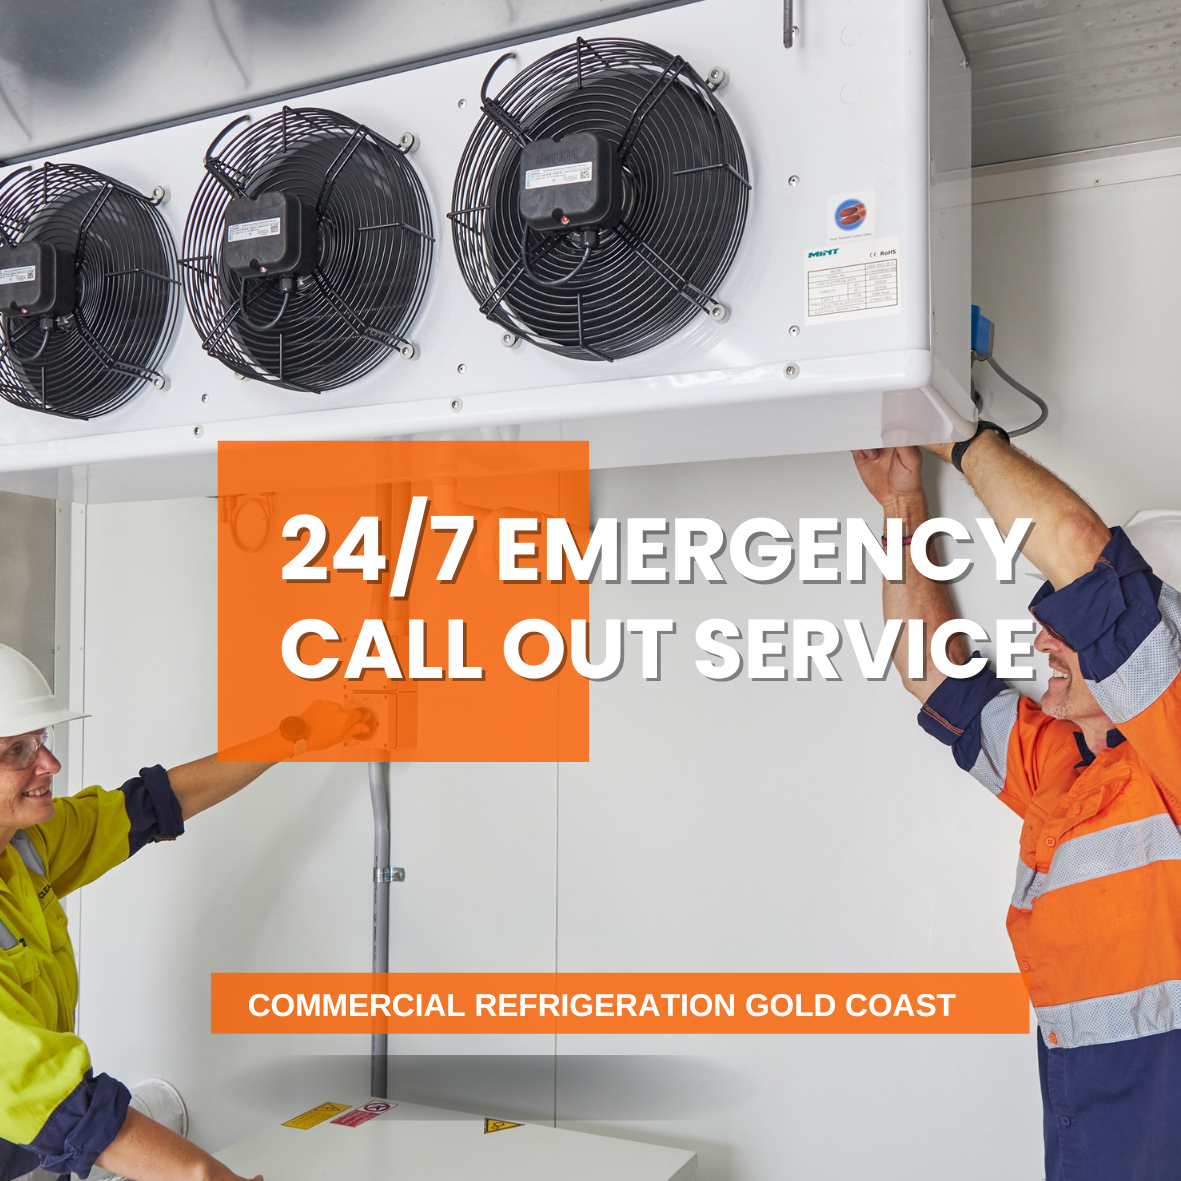 Southcoast refrigeration technicians on a emergency call out for a gold coast commercial refrigerator